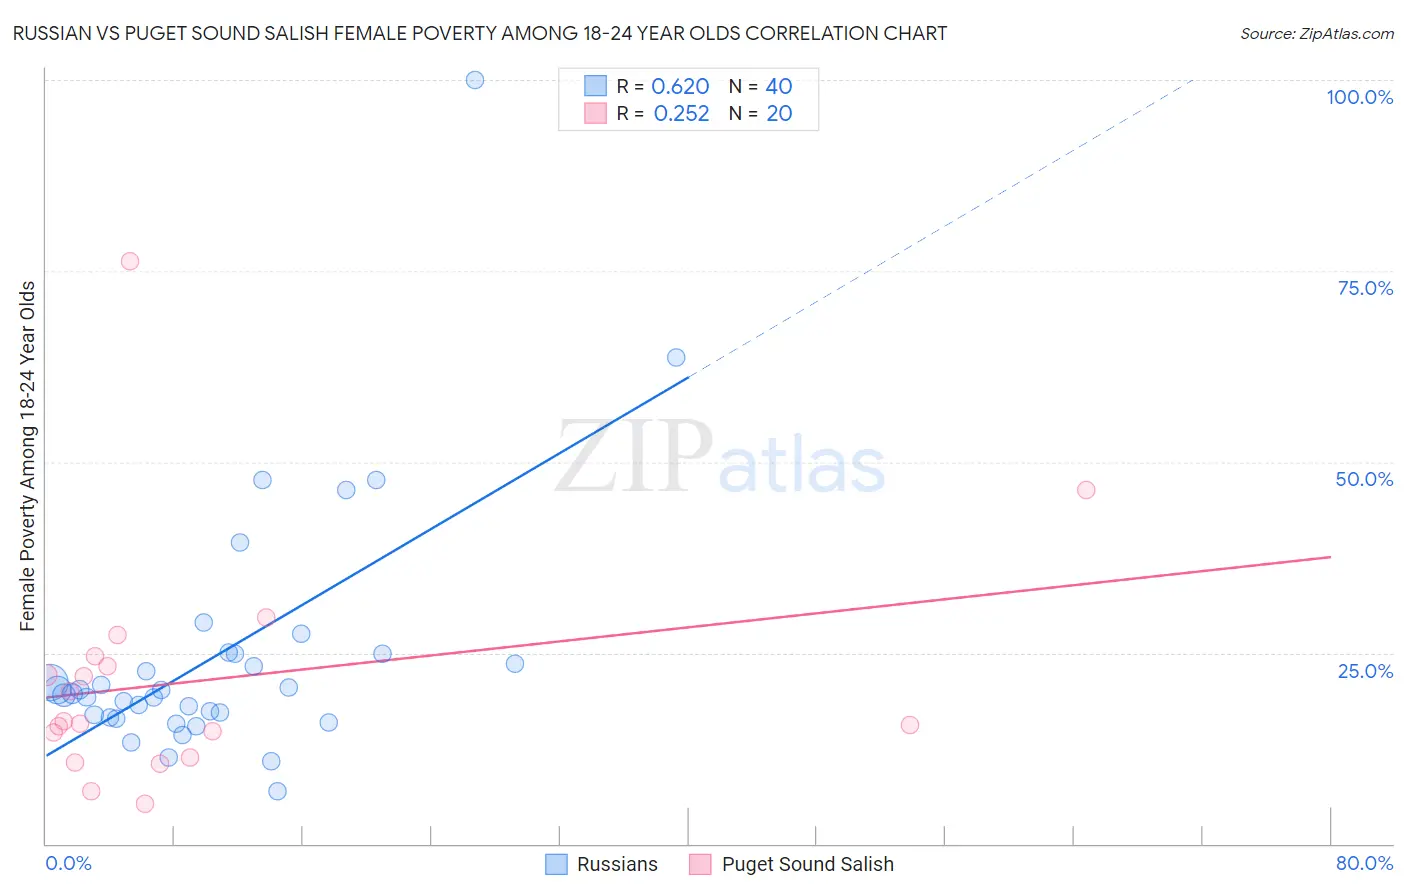 Russian vs Puget Sound Salish Female Poverty Among 18-24 Year Olds